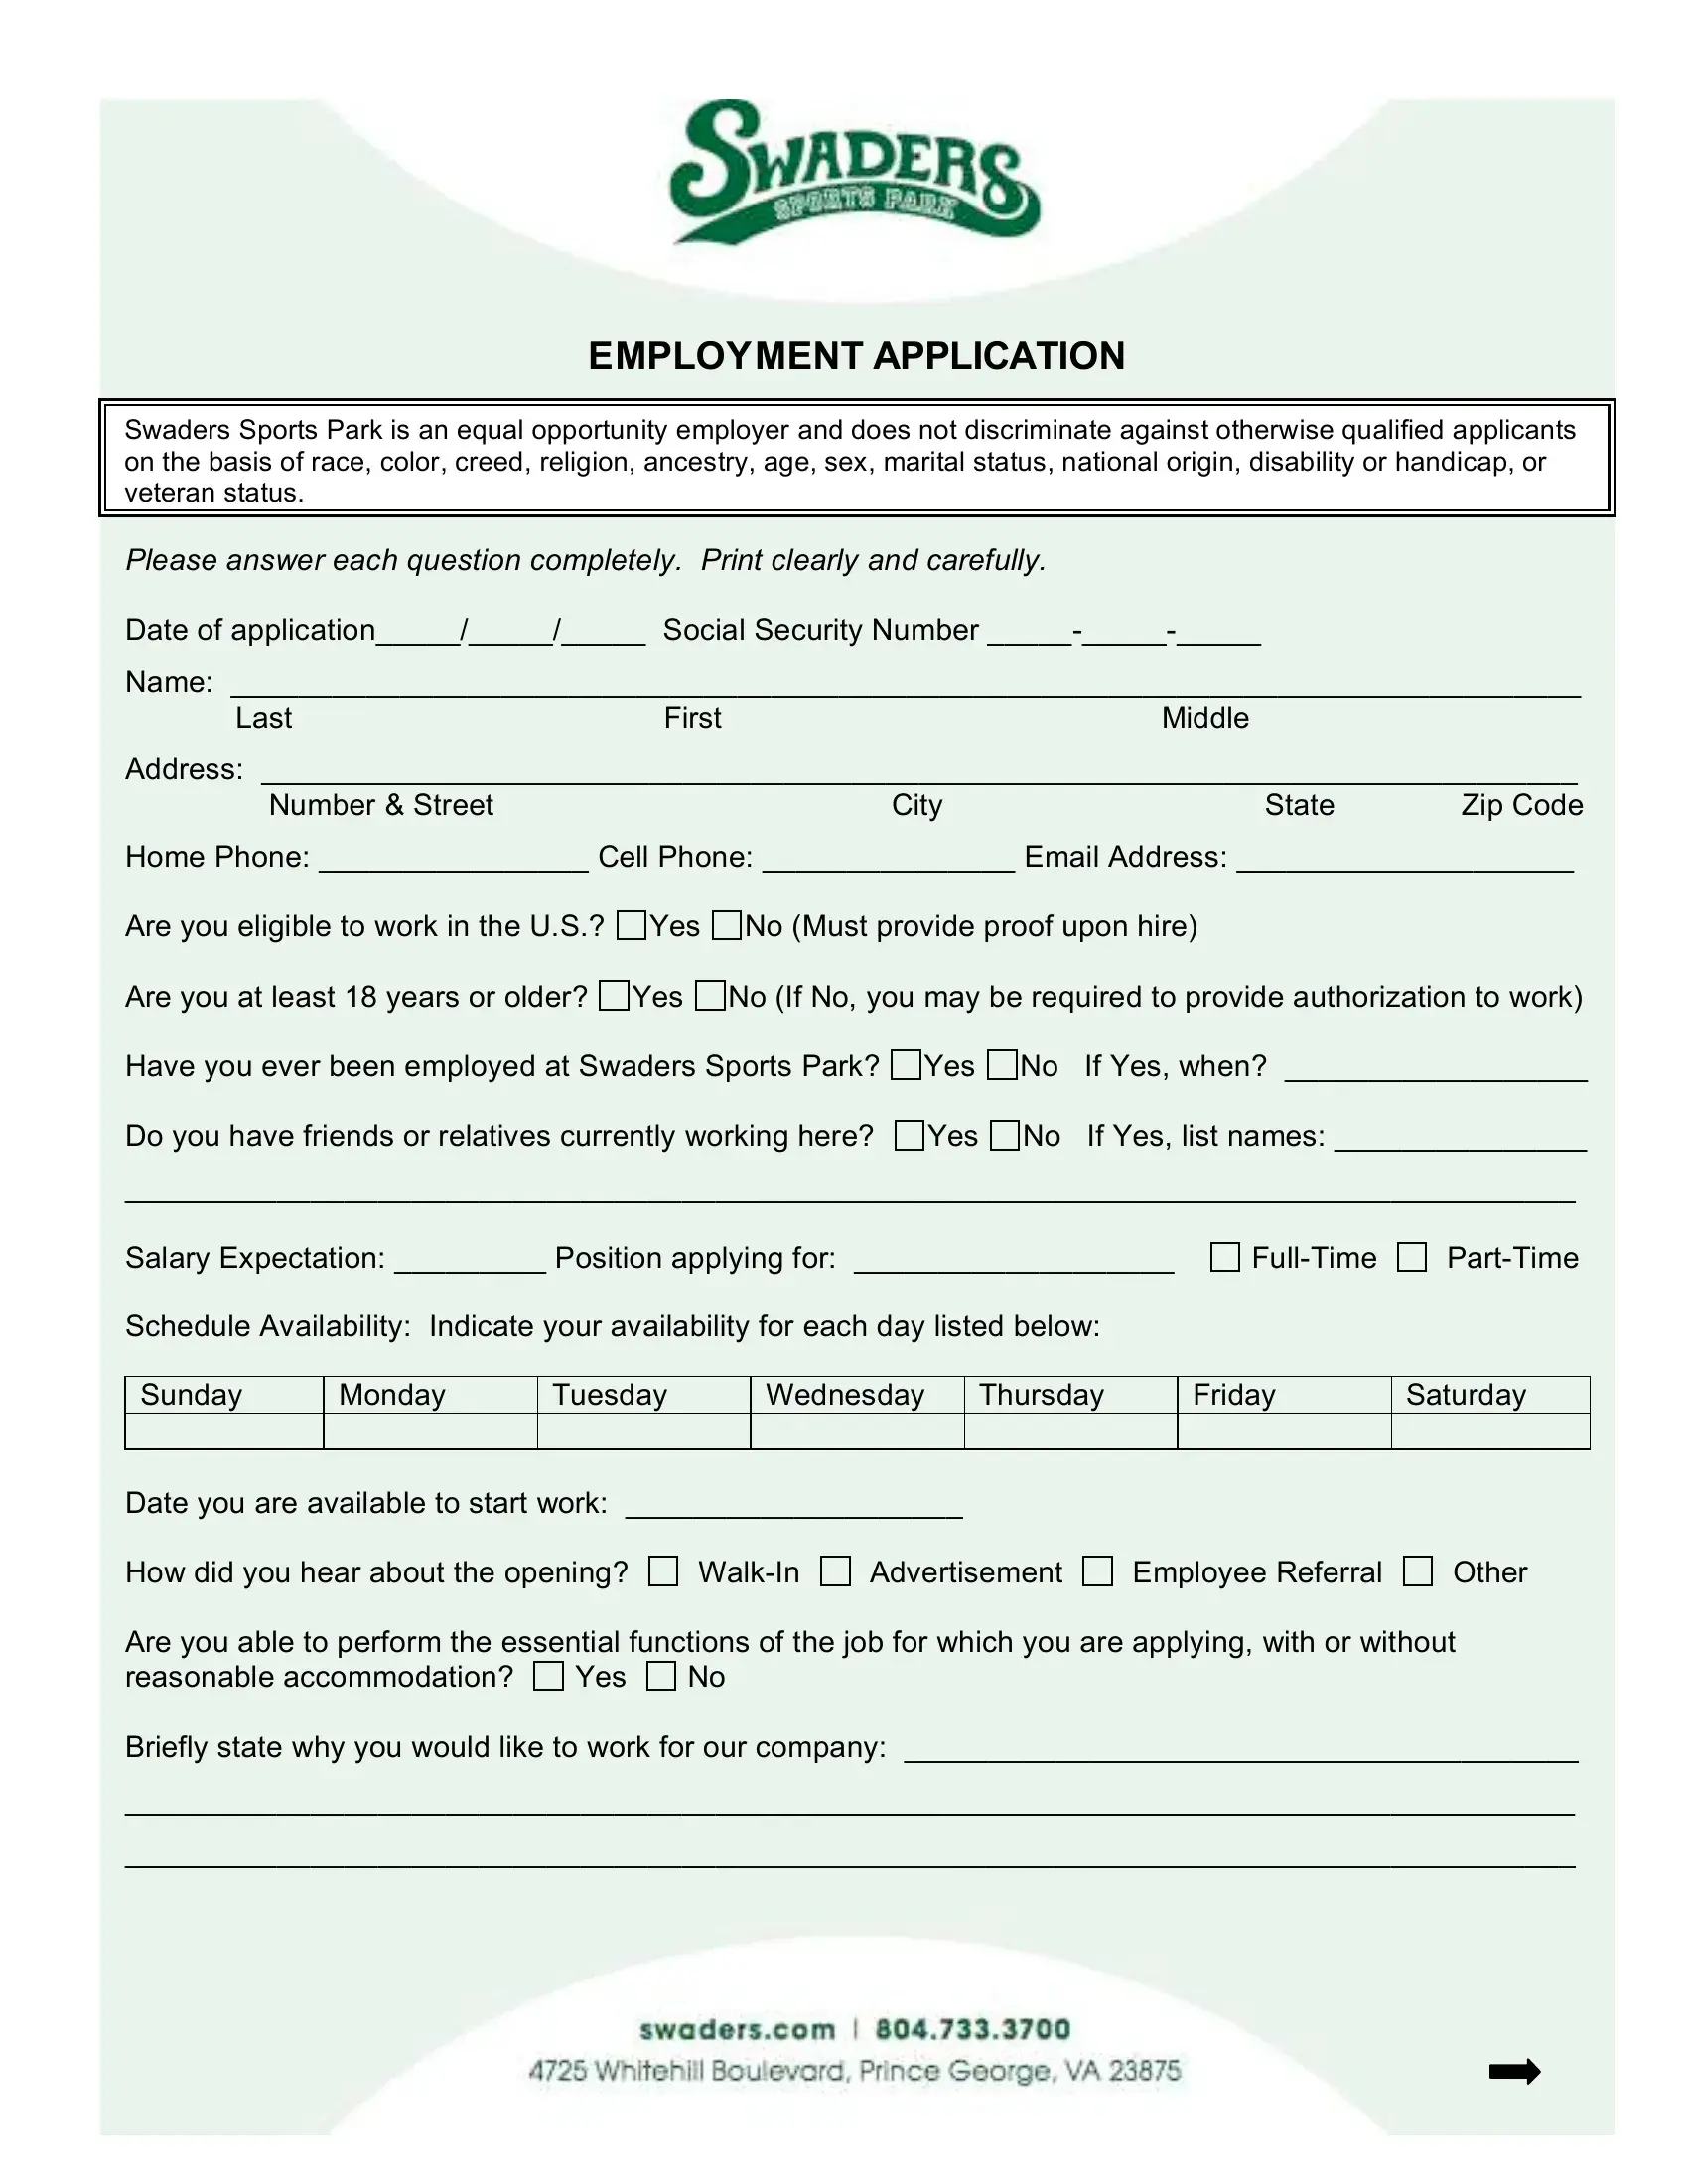 Swaders Job Application Form Preview